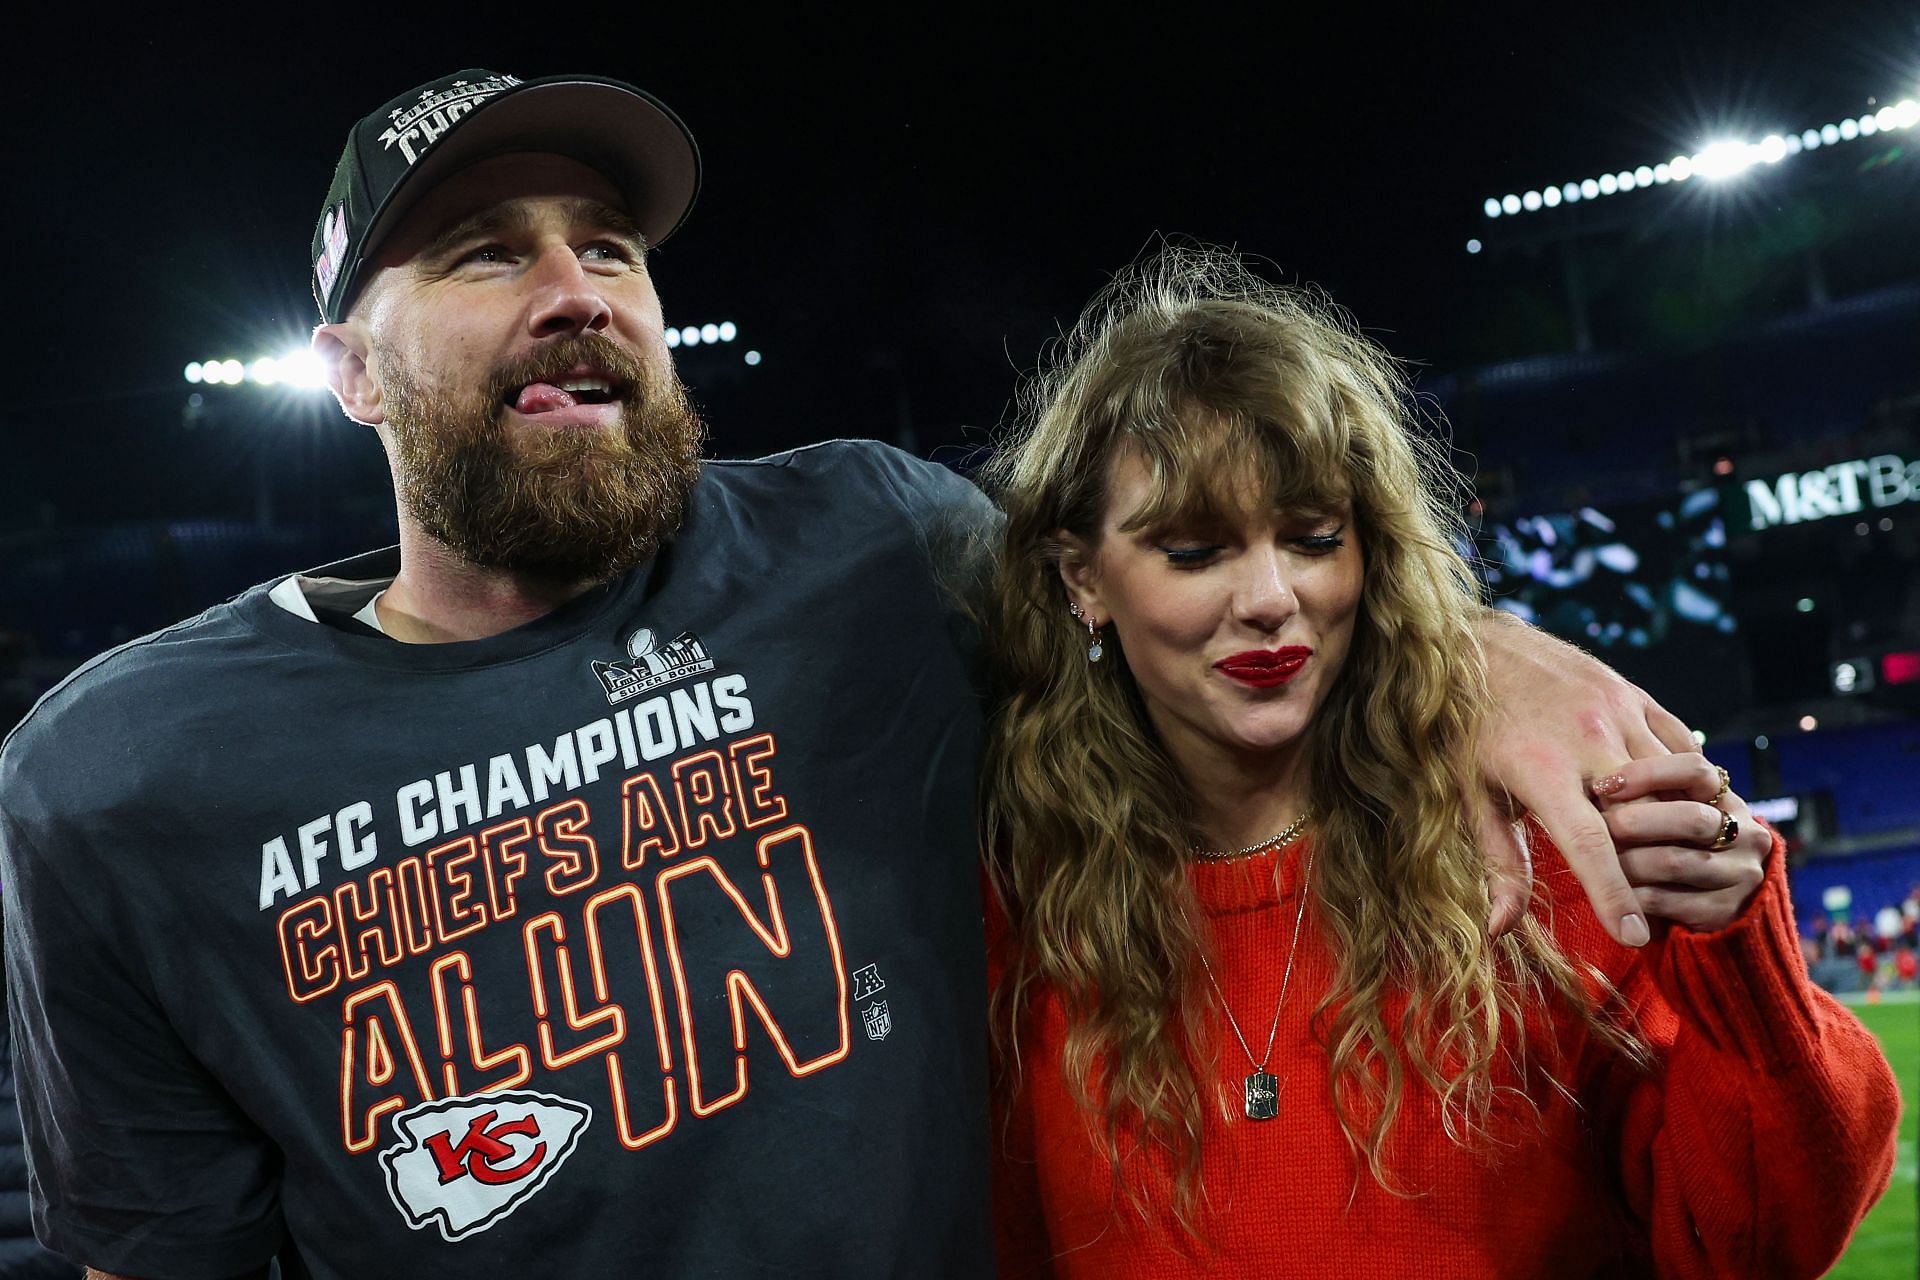 Taylor Swift and Kelce at the AFC Championship - Kansas City Chiefs v Baltimore Ravens